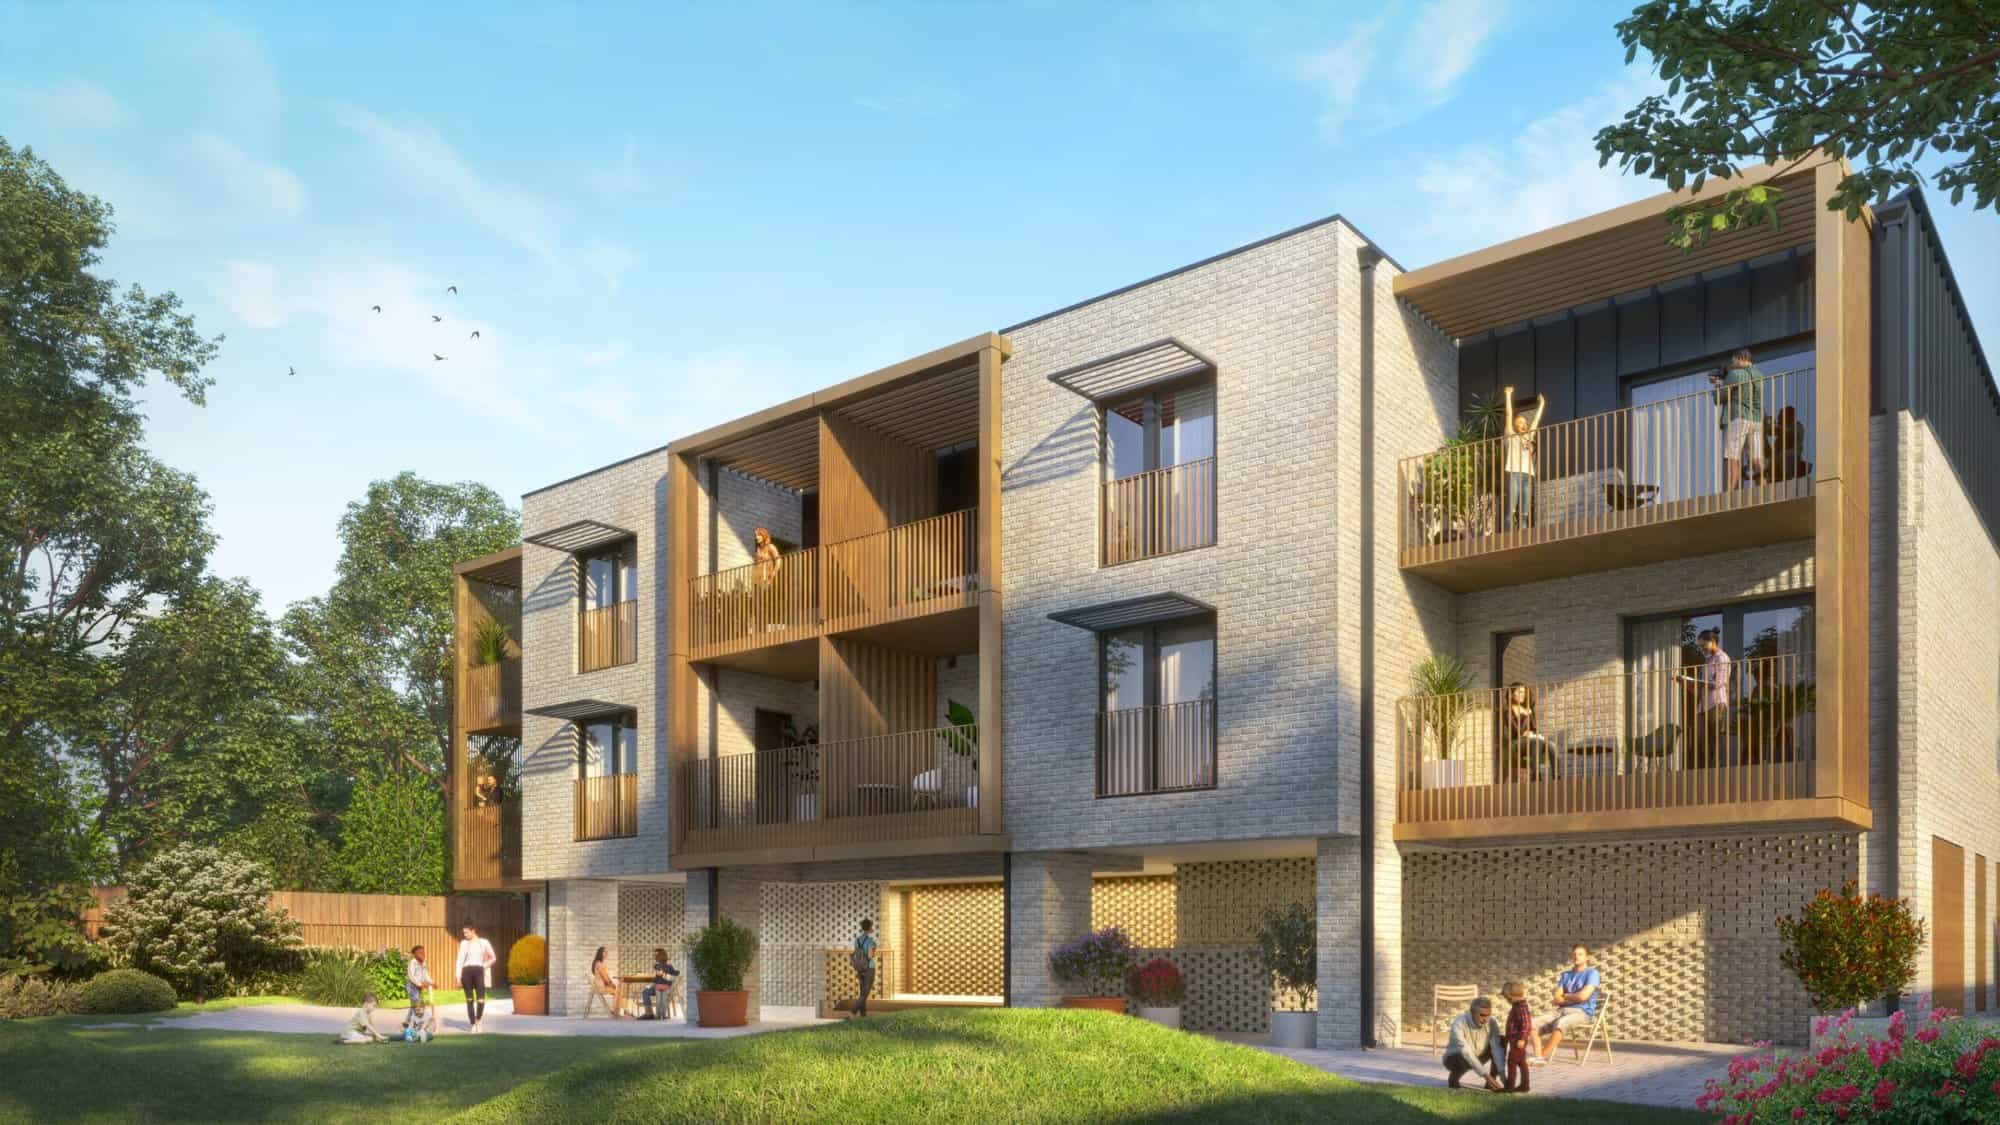 Chequers B passivhaus new homes for Epping Forest District Council